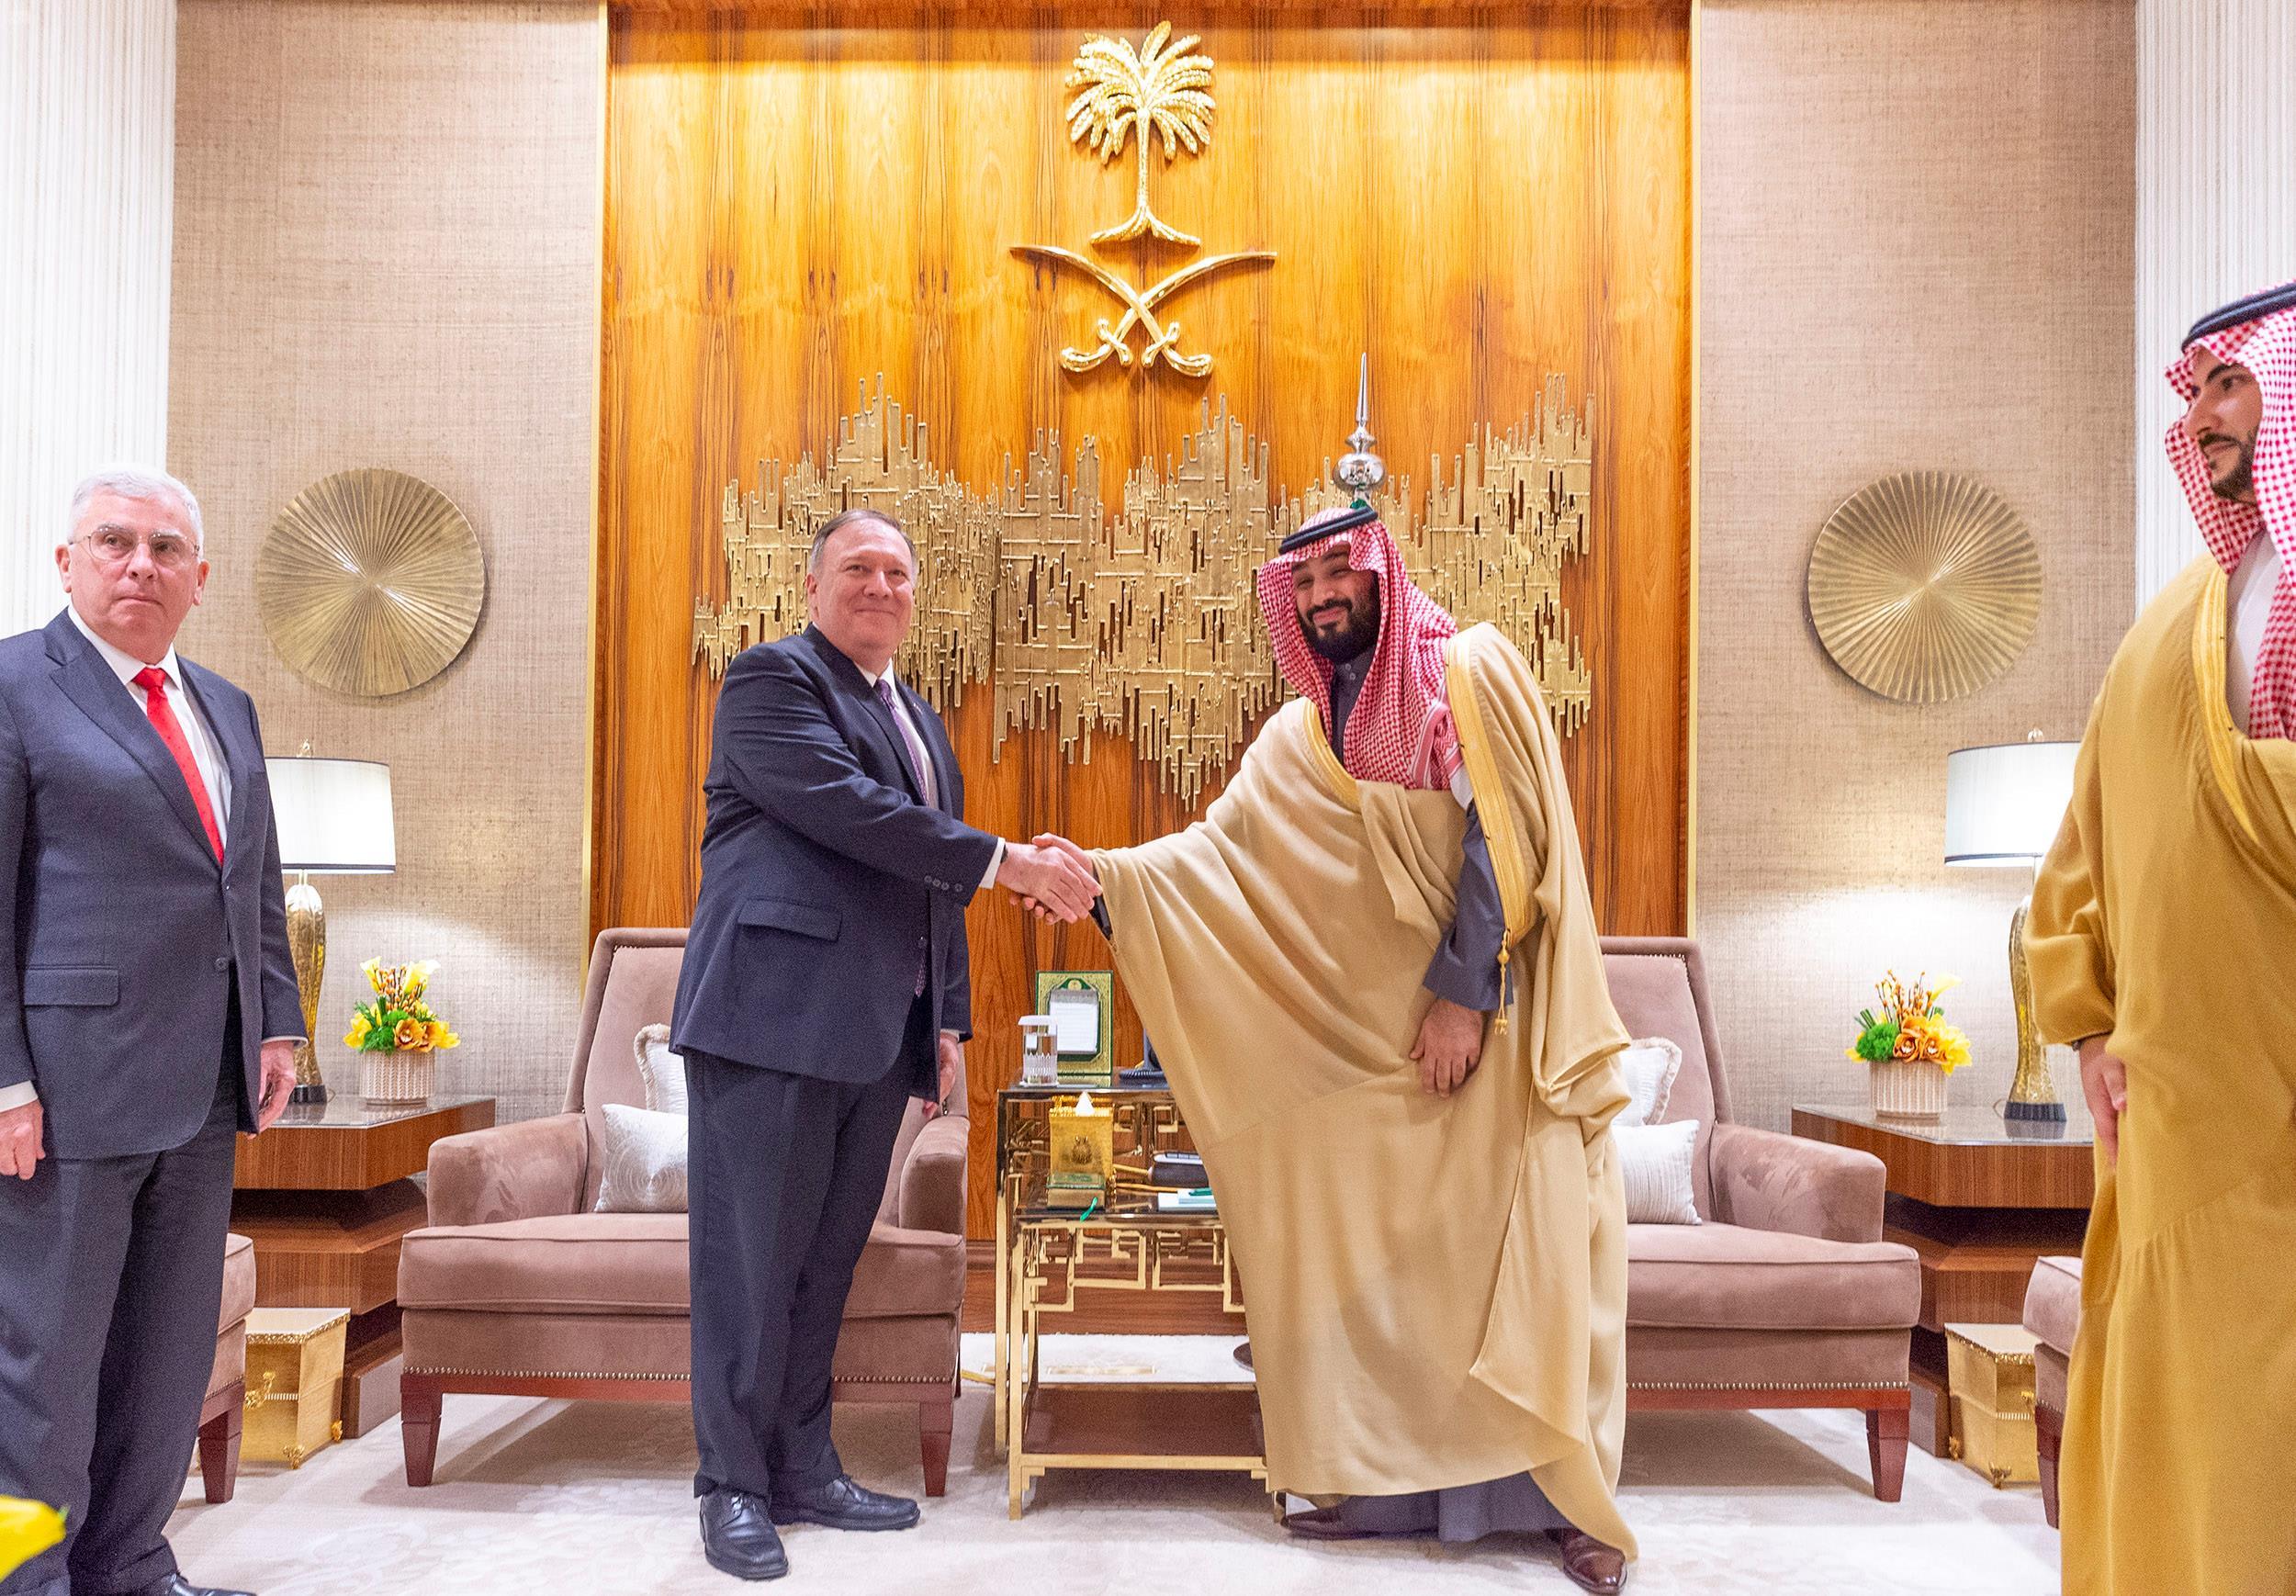 Mike Pompeo and Crown Prince Mohammed bin Salman in Riyadh on February 21, 2020.